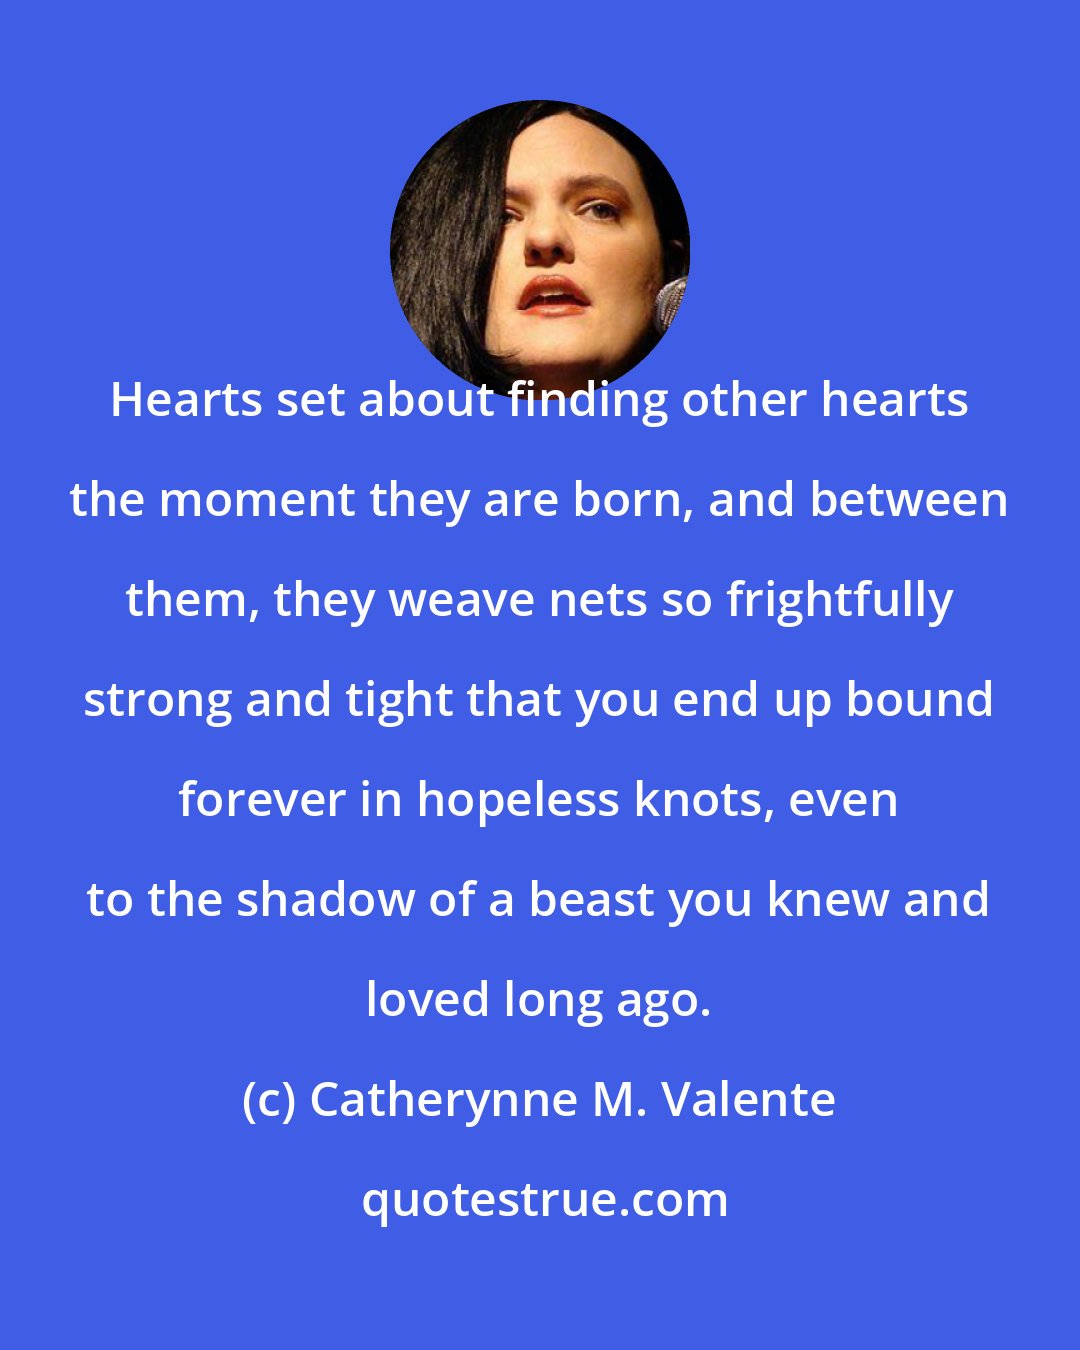 Catherynne M. Valente: Hearts set about finding other hearts the moment they are born, and between them, they weave nets so frightfully strong and tight that you end up bound forever in hopeless knots, even to the shadow of a beast you knew and loved long ago.